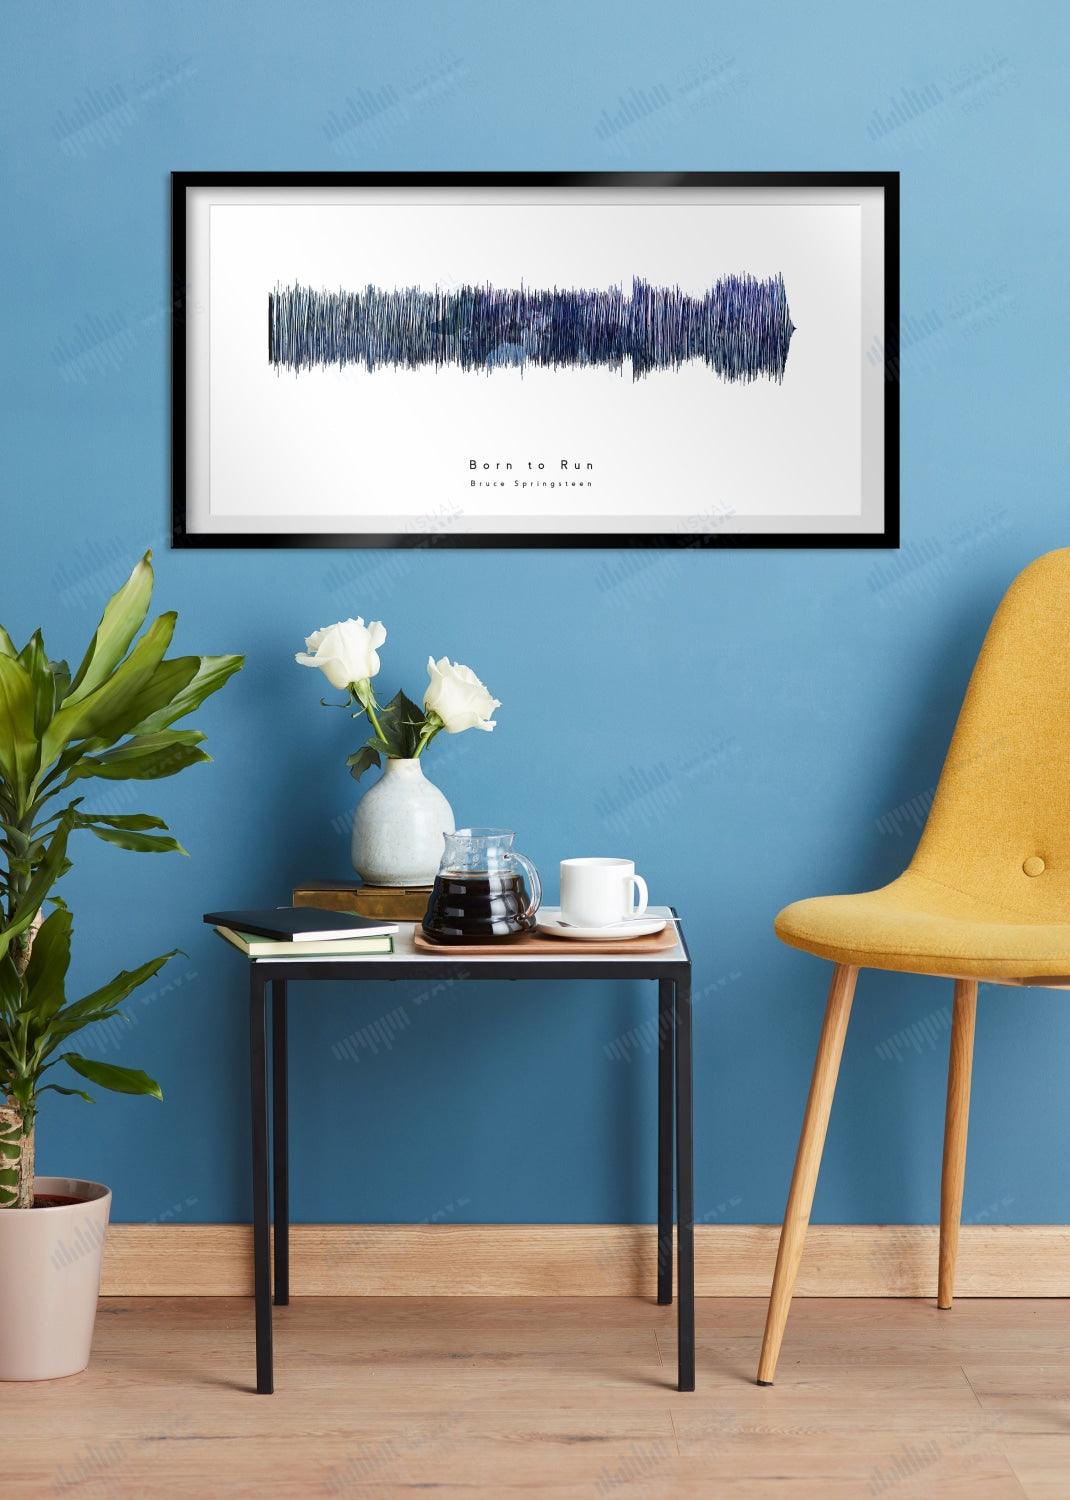 Born to Run by Bruce Springsteen - Visual Wave Prints